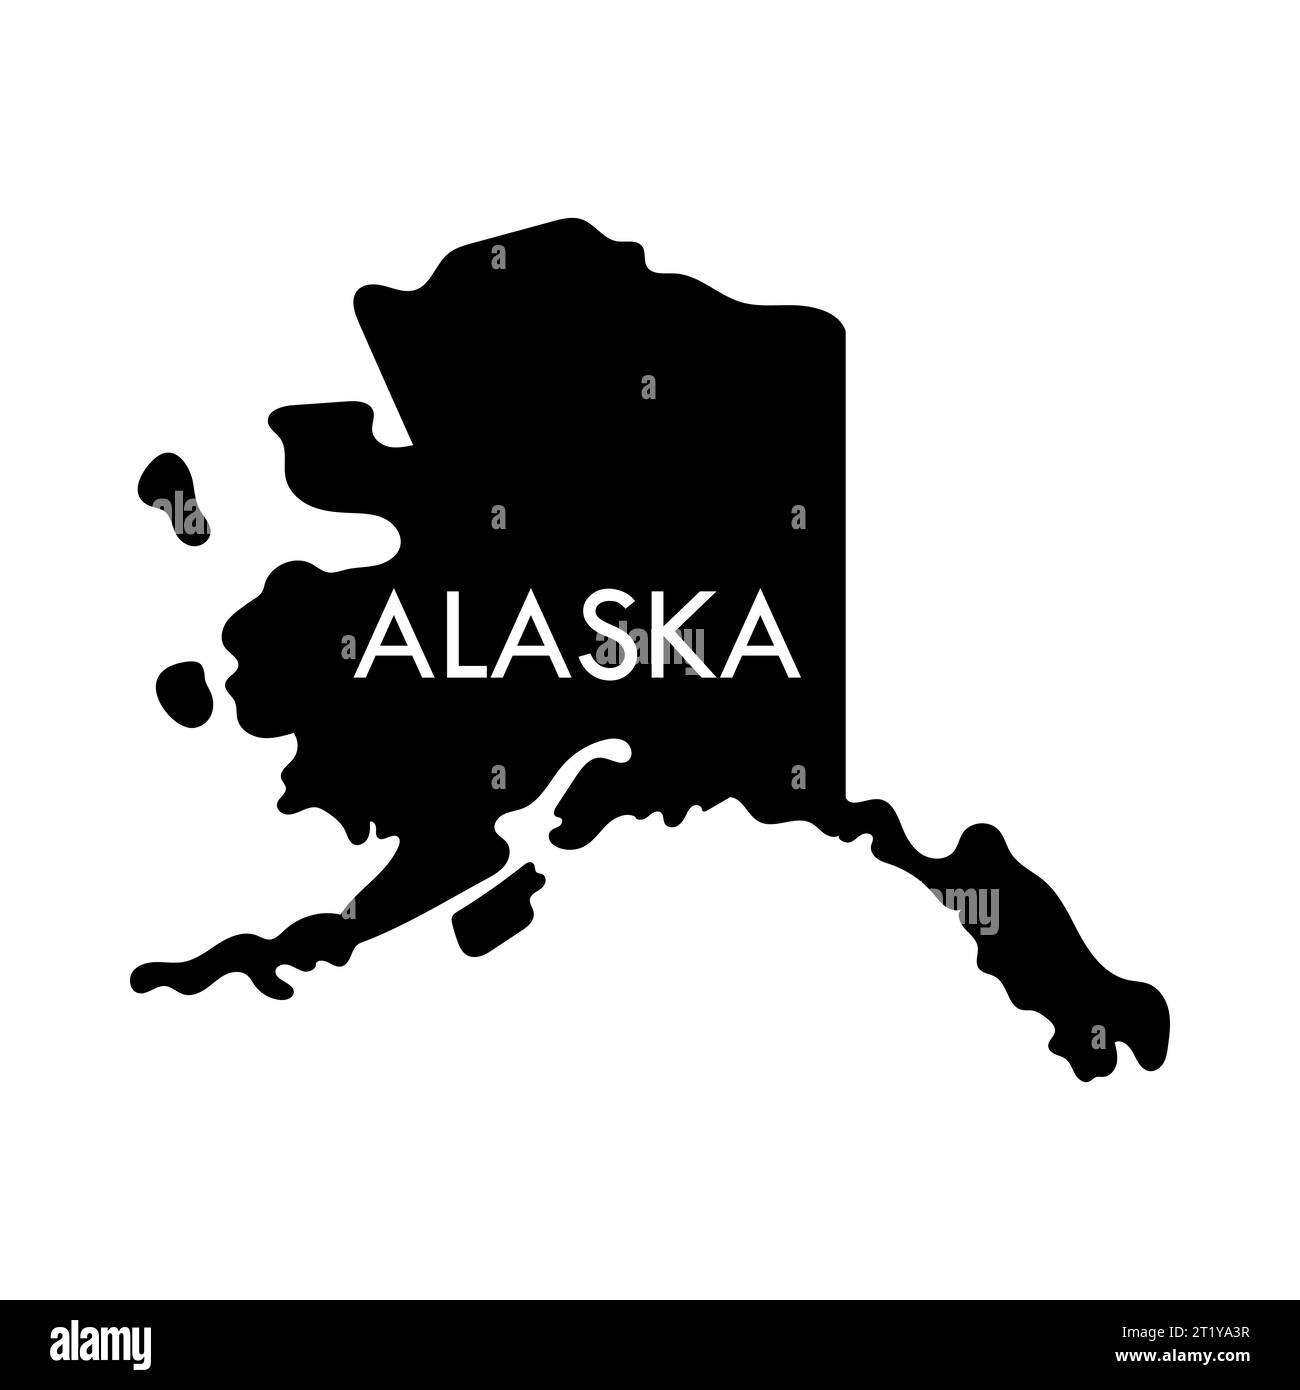 Alaska simple logo. State map outline - smooth simplified US state